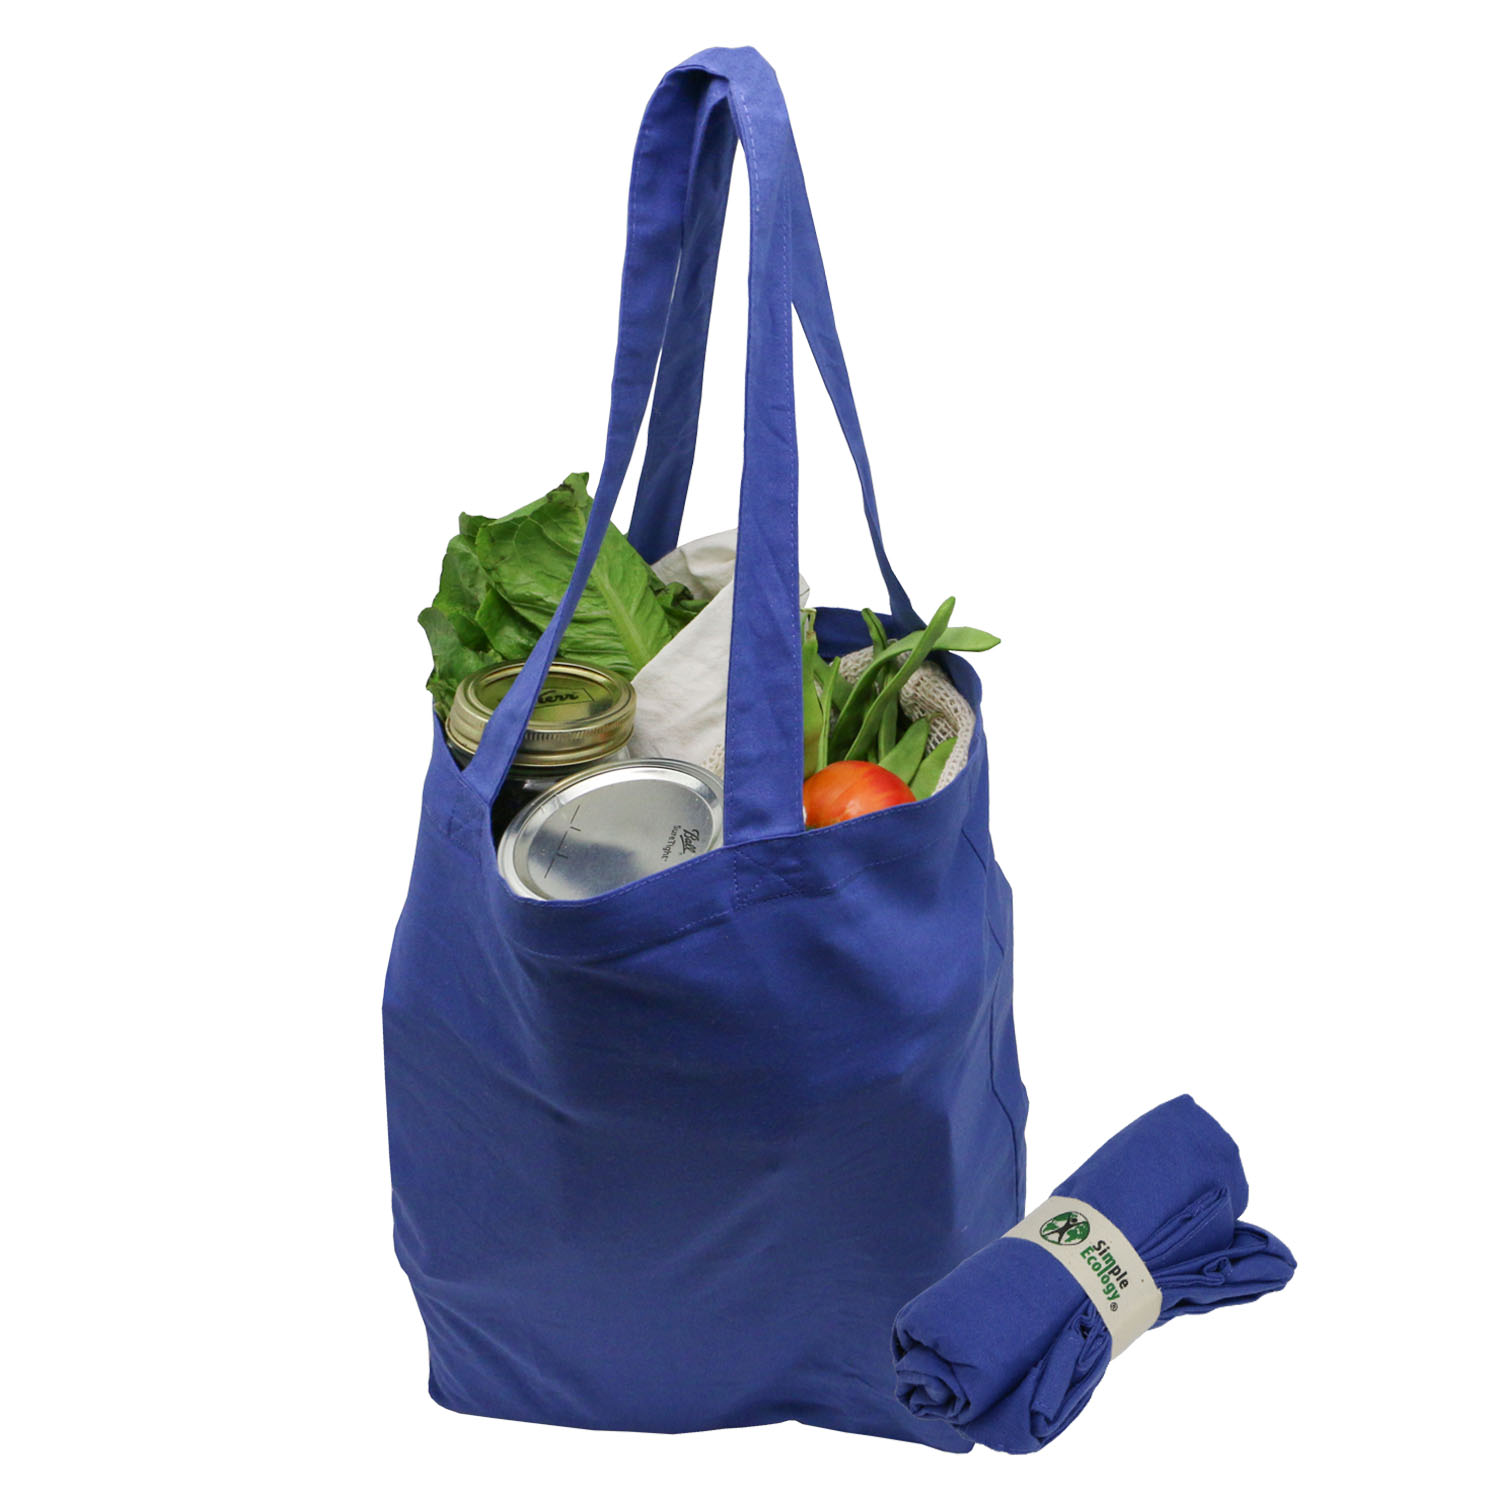 Details about   Foldable Handy Shopping Bags Reusable Tote Pouch Handbags Chinese White Vine 